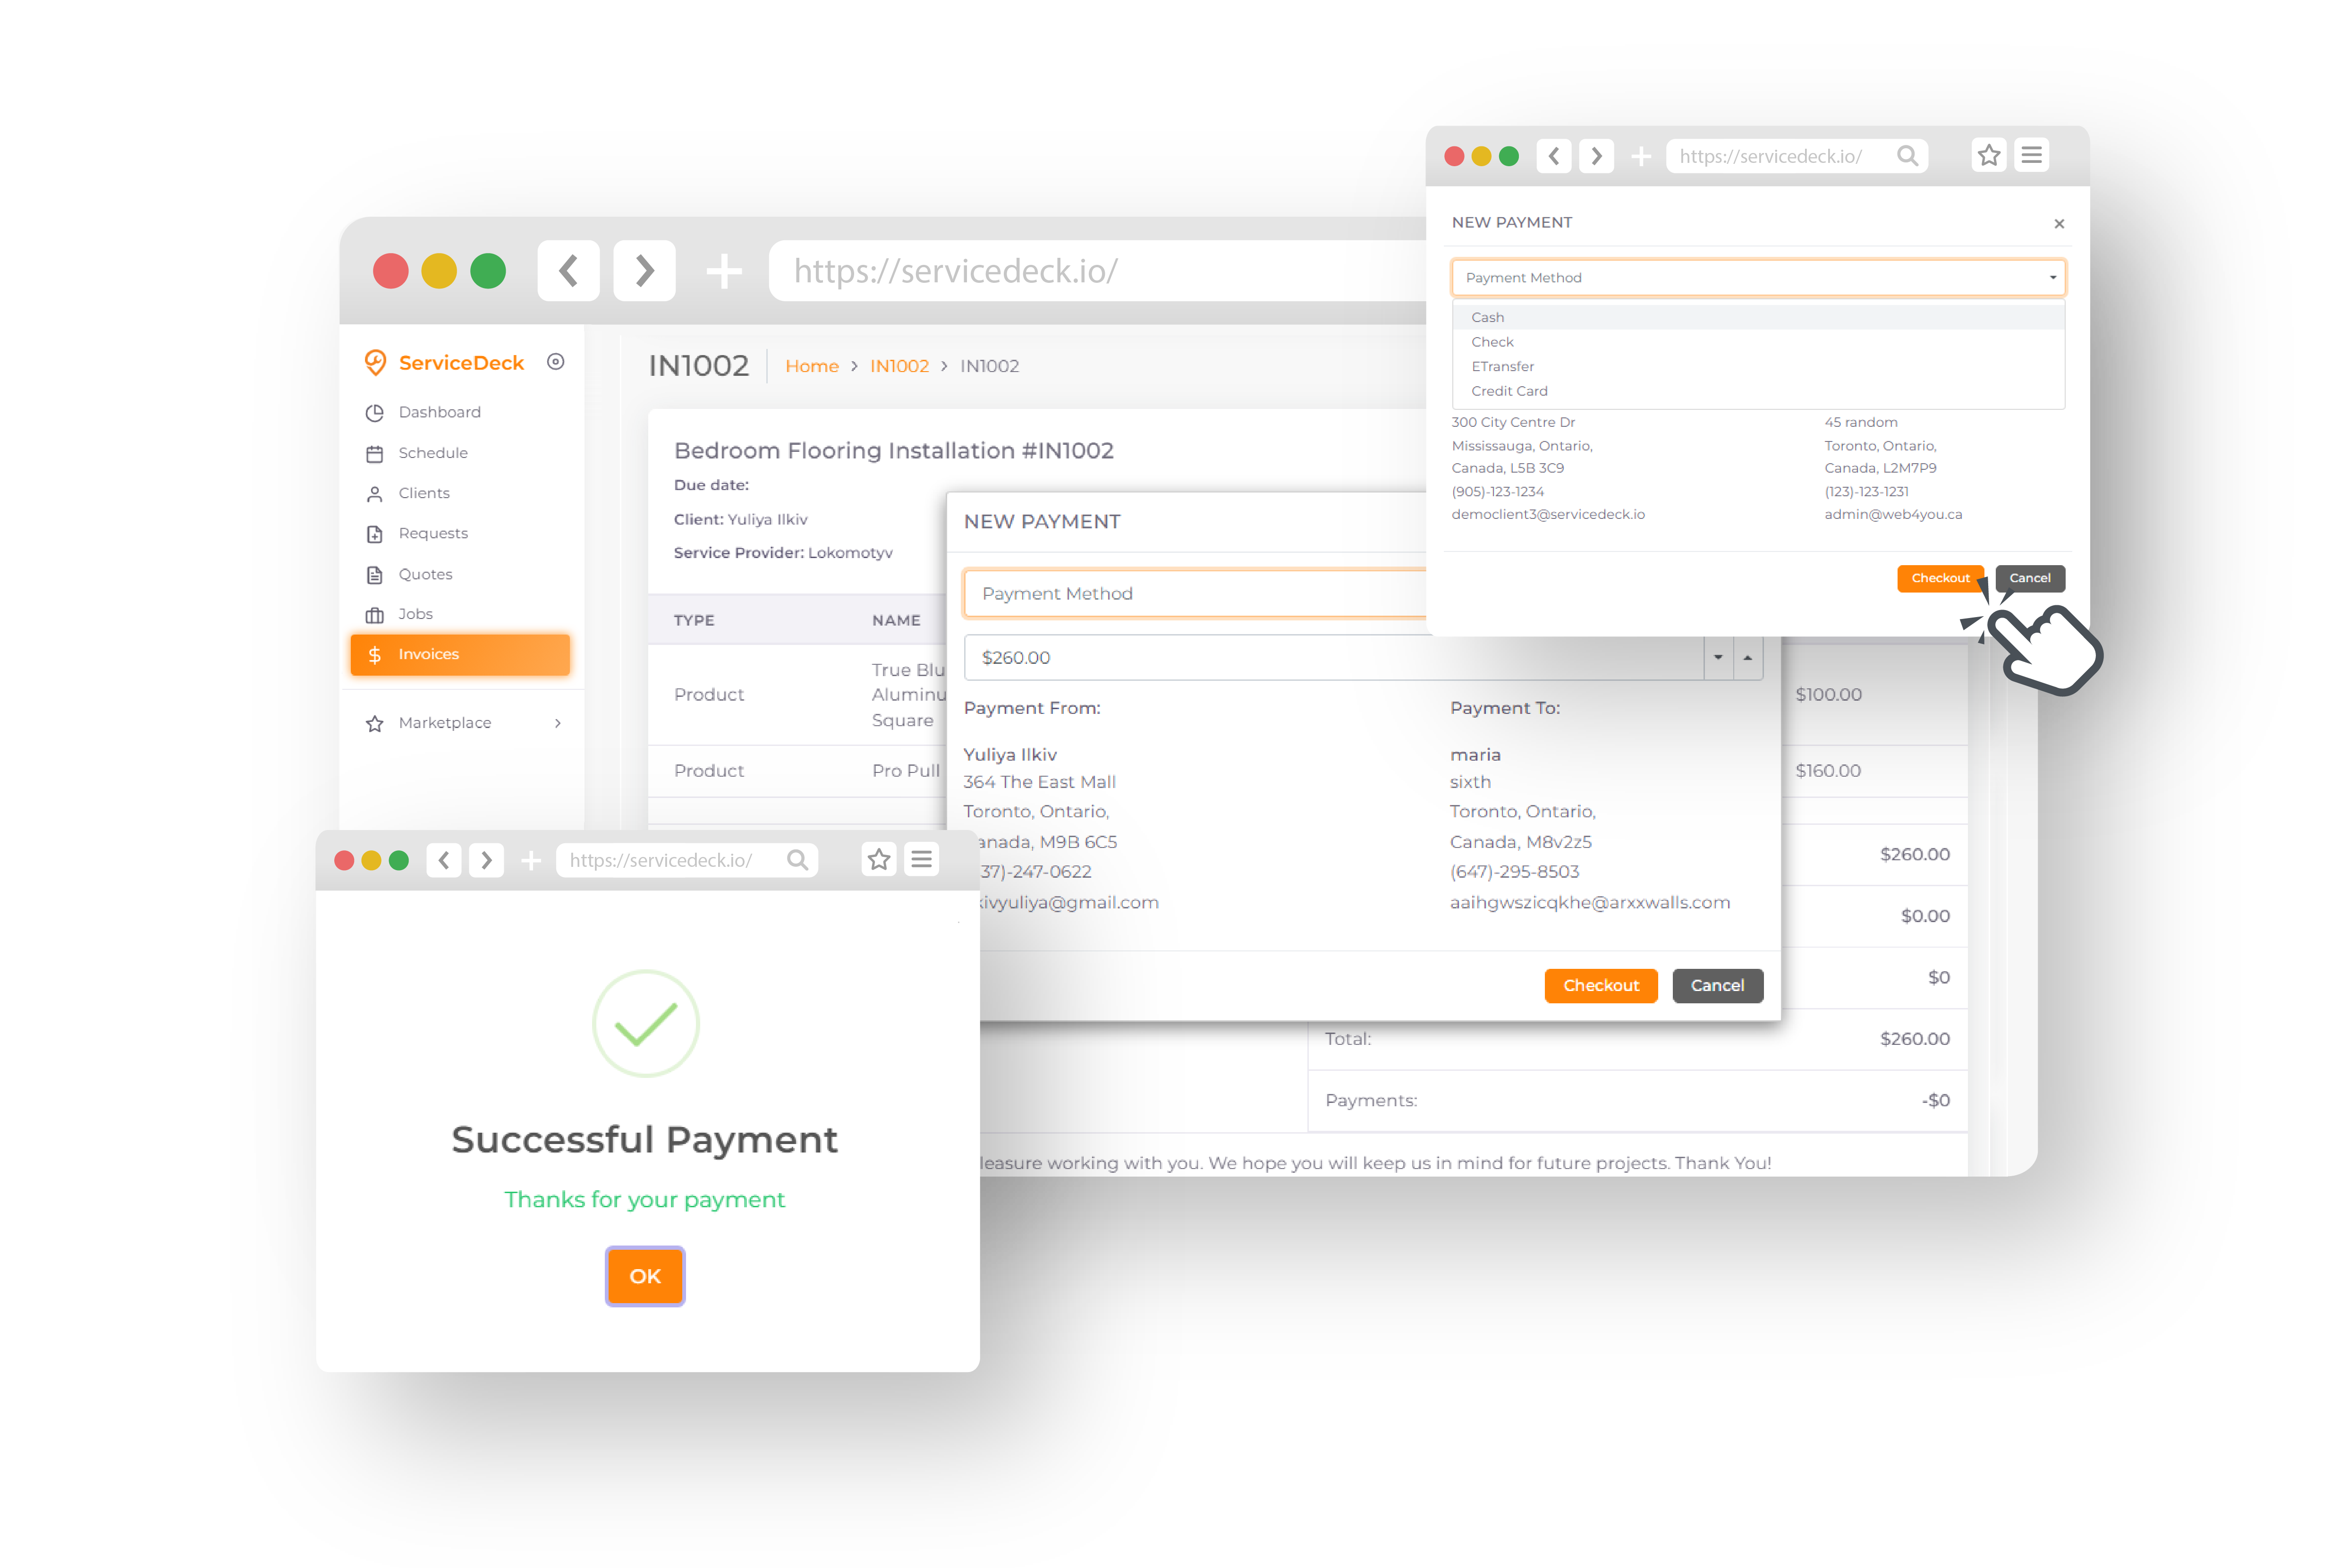 Invoices Management: Simplify your invoicing process with ServiceDeck's integrated invoicing feature. Convert completed jobs into customizable invoices with just one click, and send them to your clients in no time.